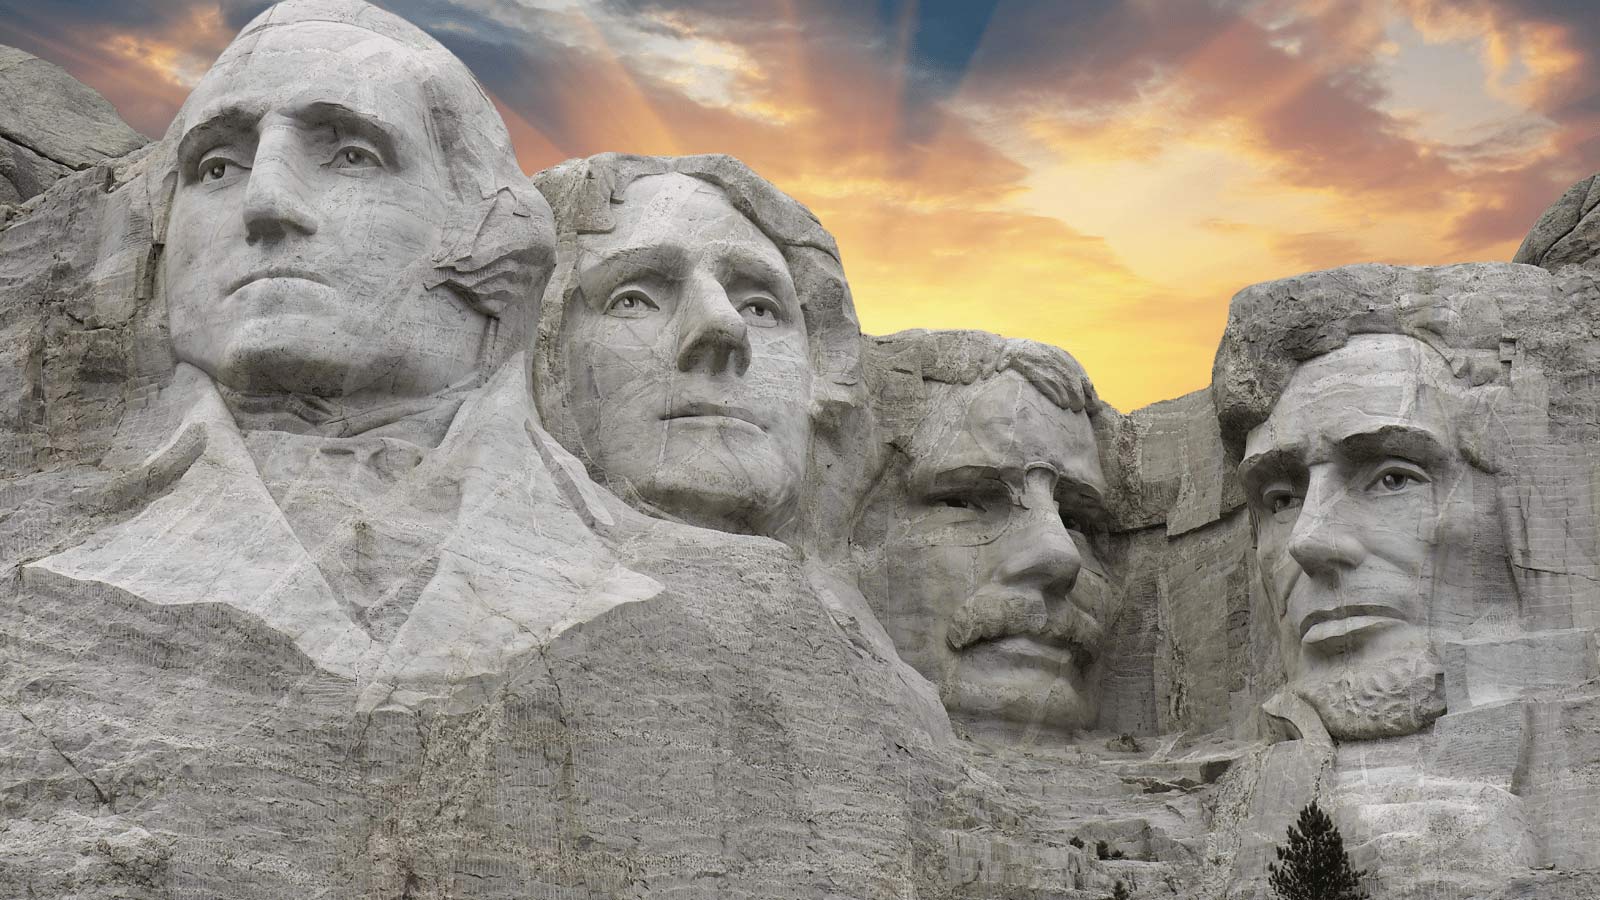 <p>Mount Rushmore is a monument to American history. It’s located in South Dakota and features the faces of four of the most famous presidents in American history: George Washington, Thomas Jefferson, Theodore Roosevelt, and Abraham Lincoln. It’s a great place to visit and learn about American history and the significance of these presidents.</p>